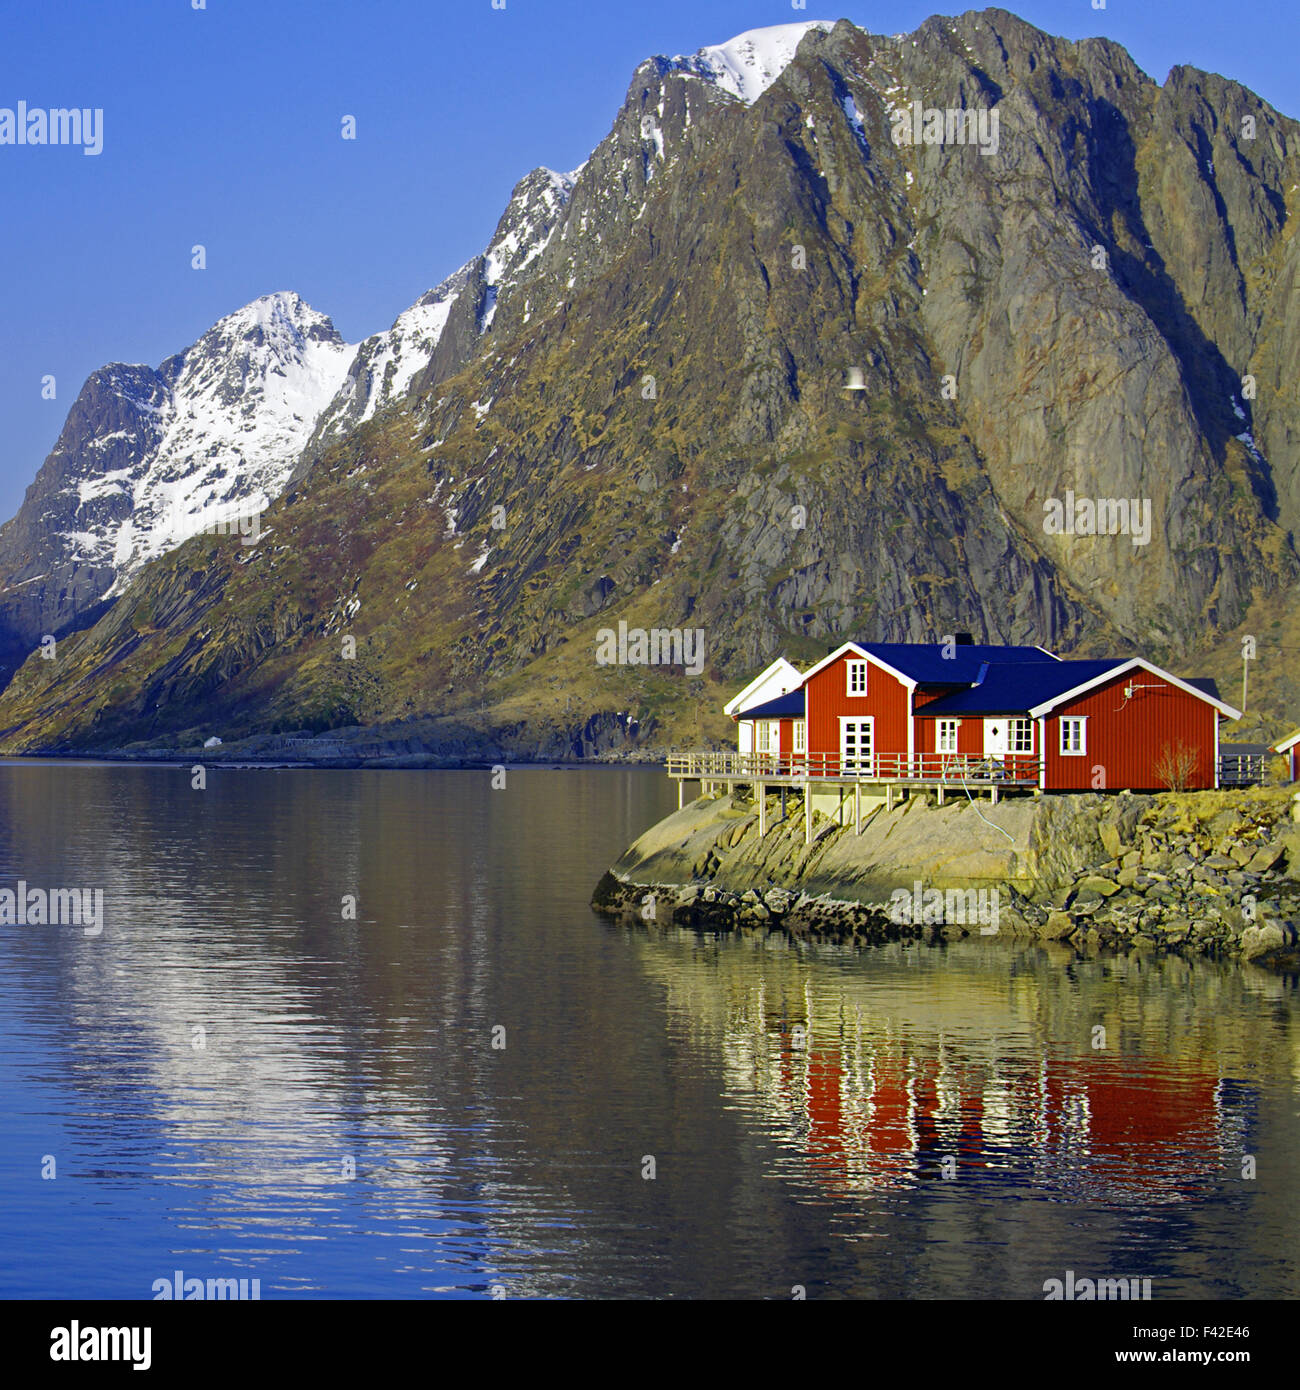 Holidays in northern norway Stock Photo